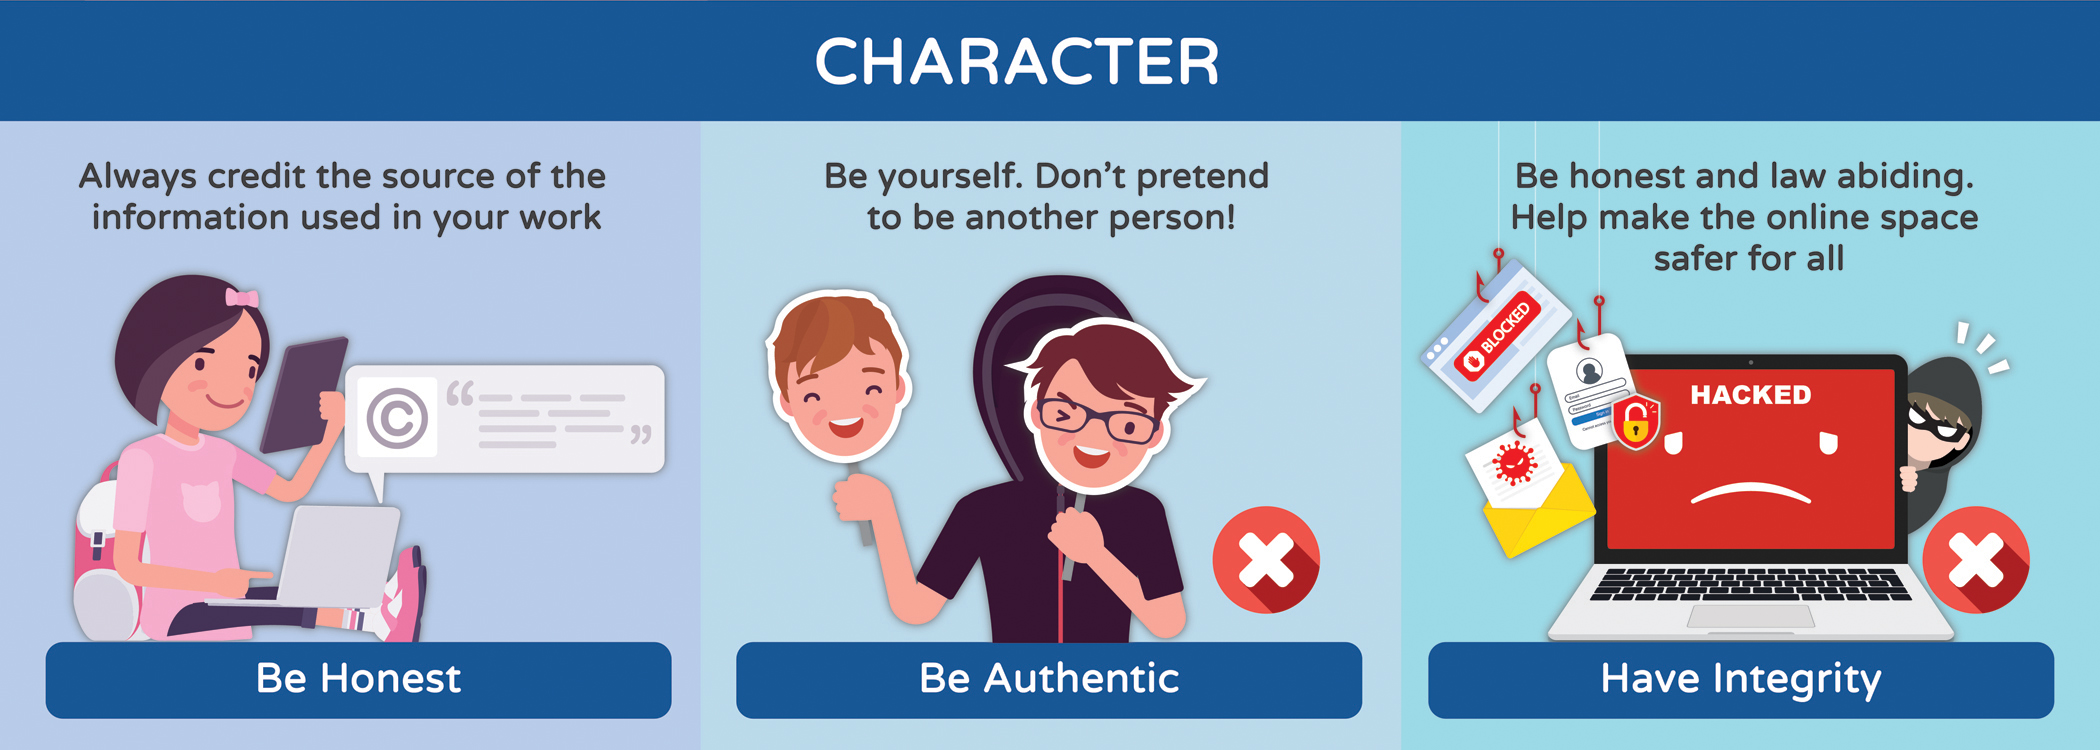 Code of Conduct - Character